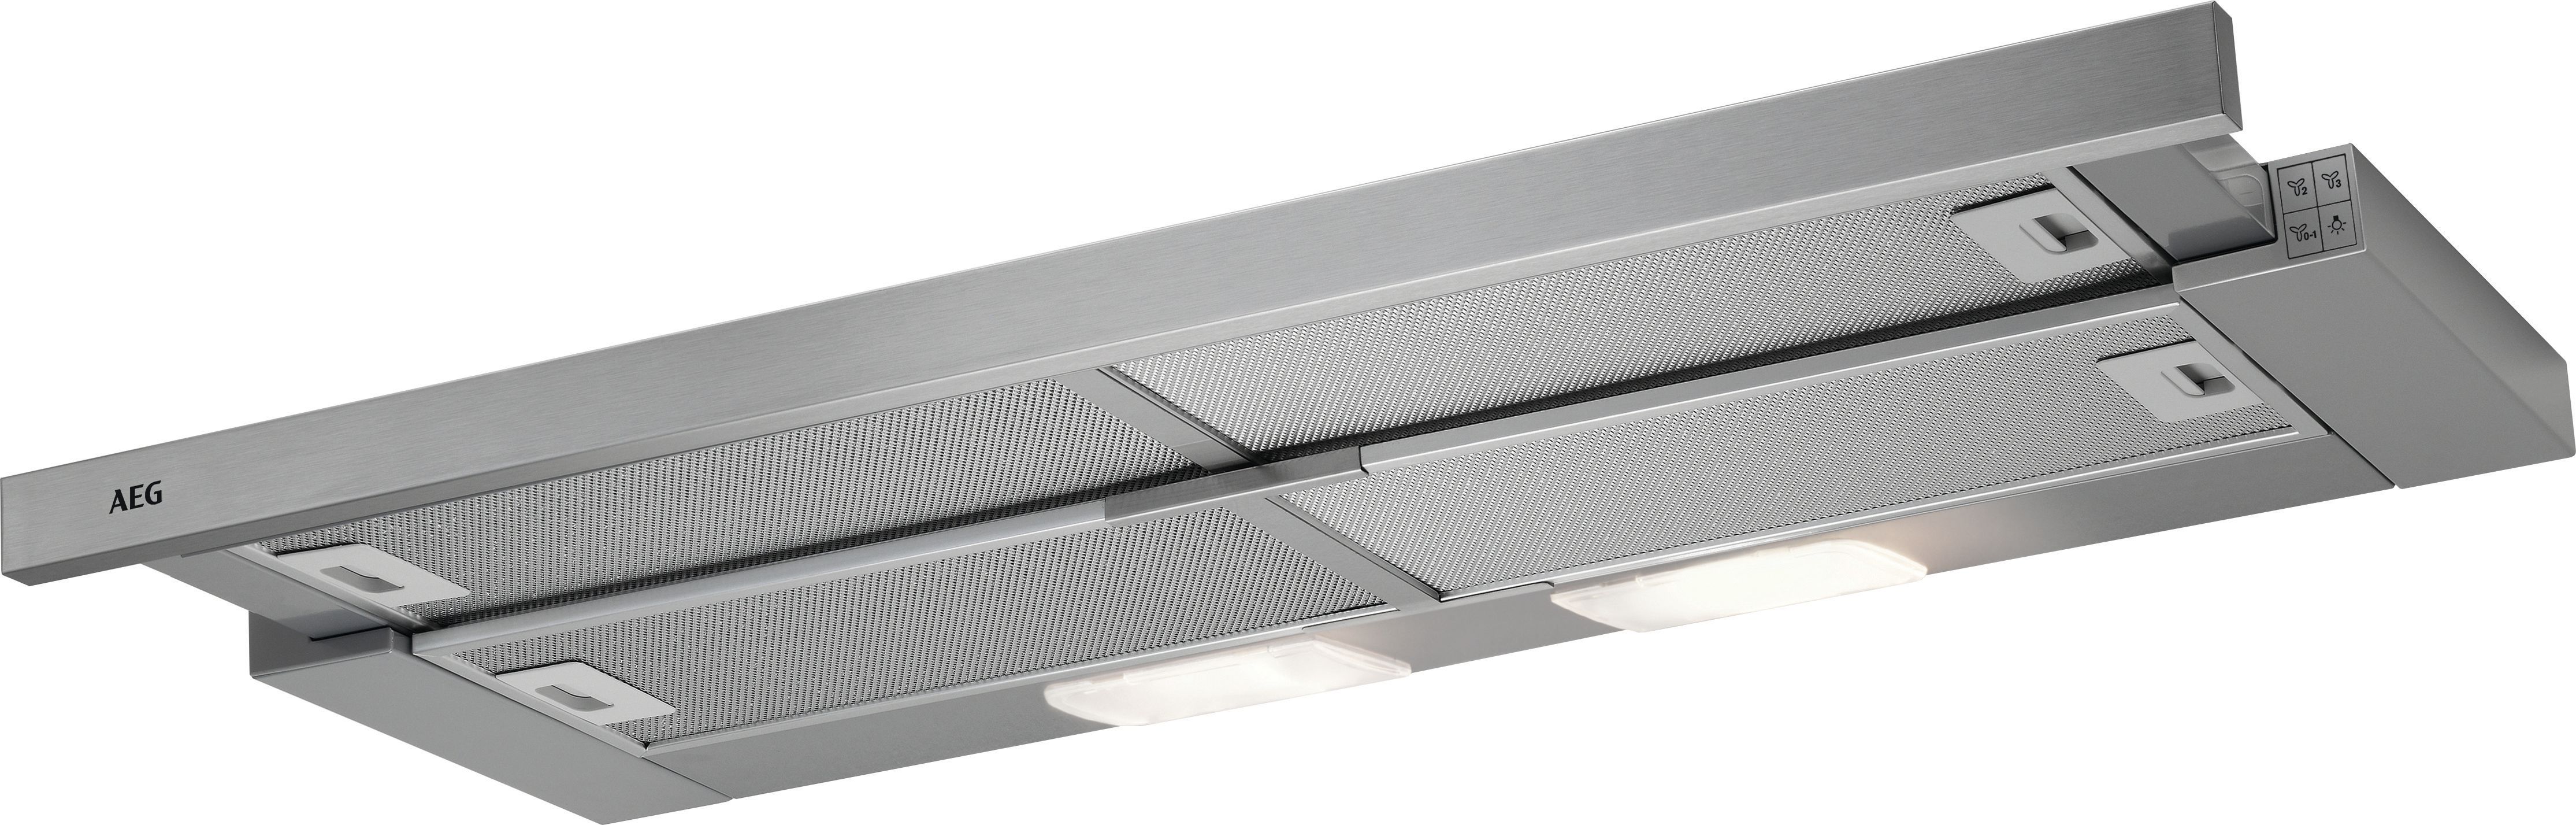 AEG DPB3932S 90cm Pull-Out Hood - Stainless Steel